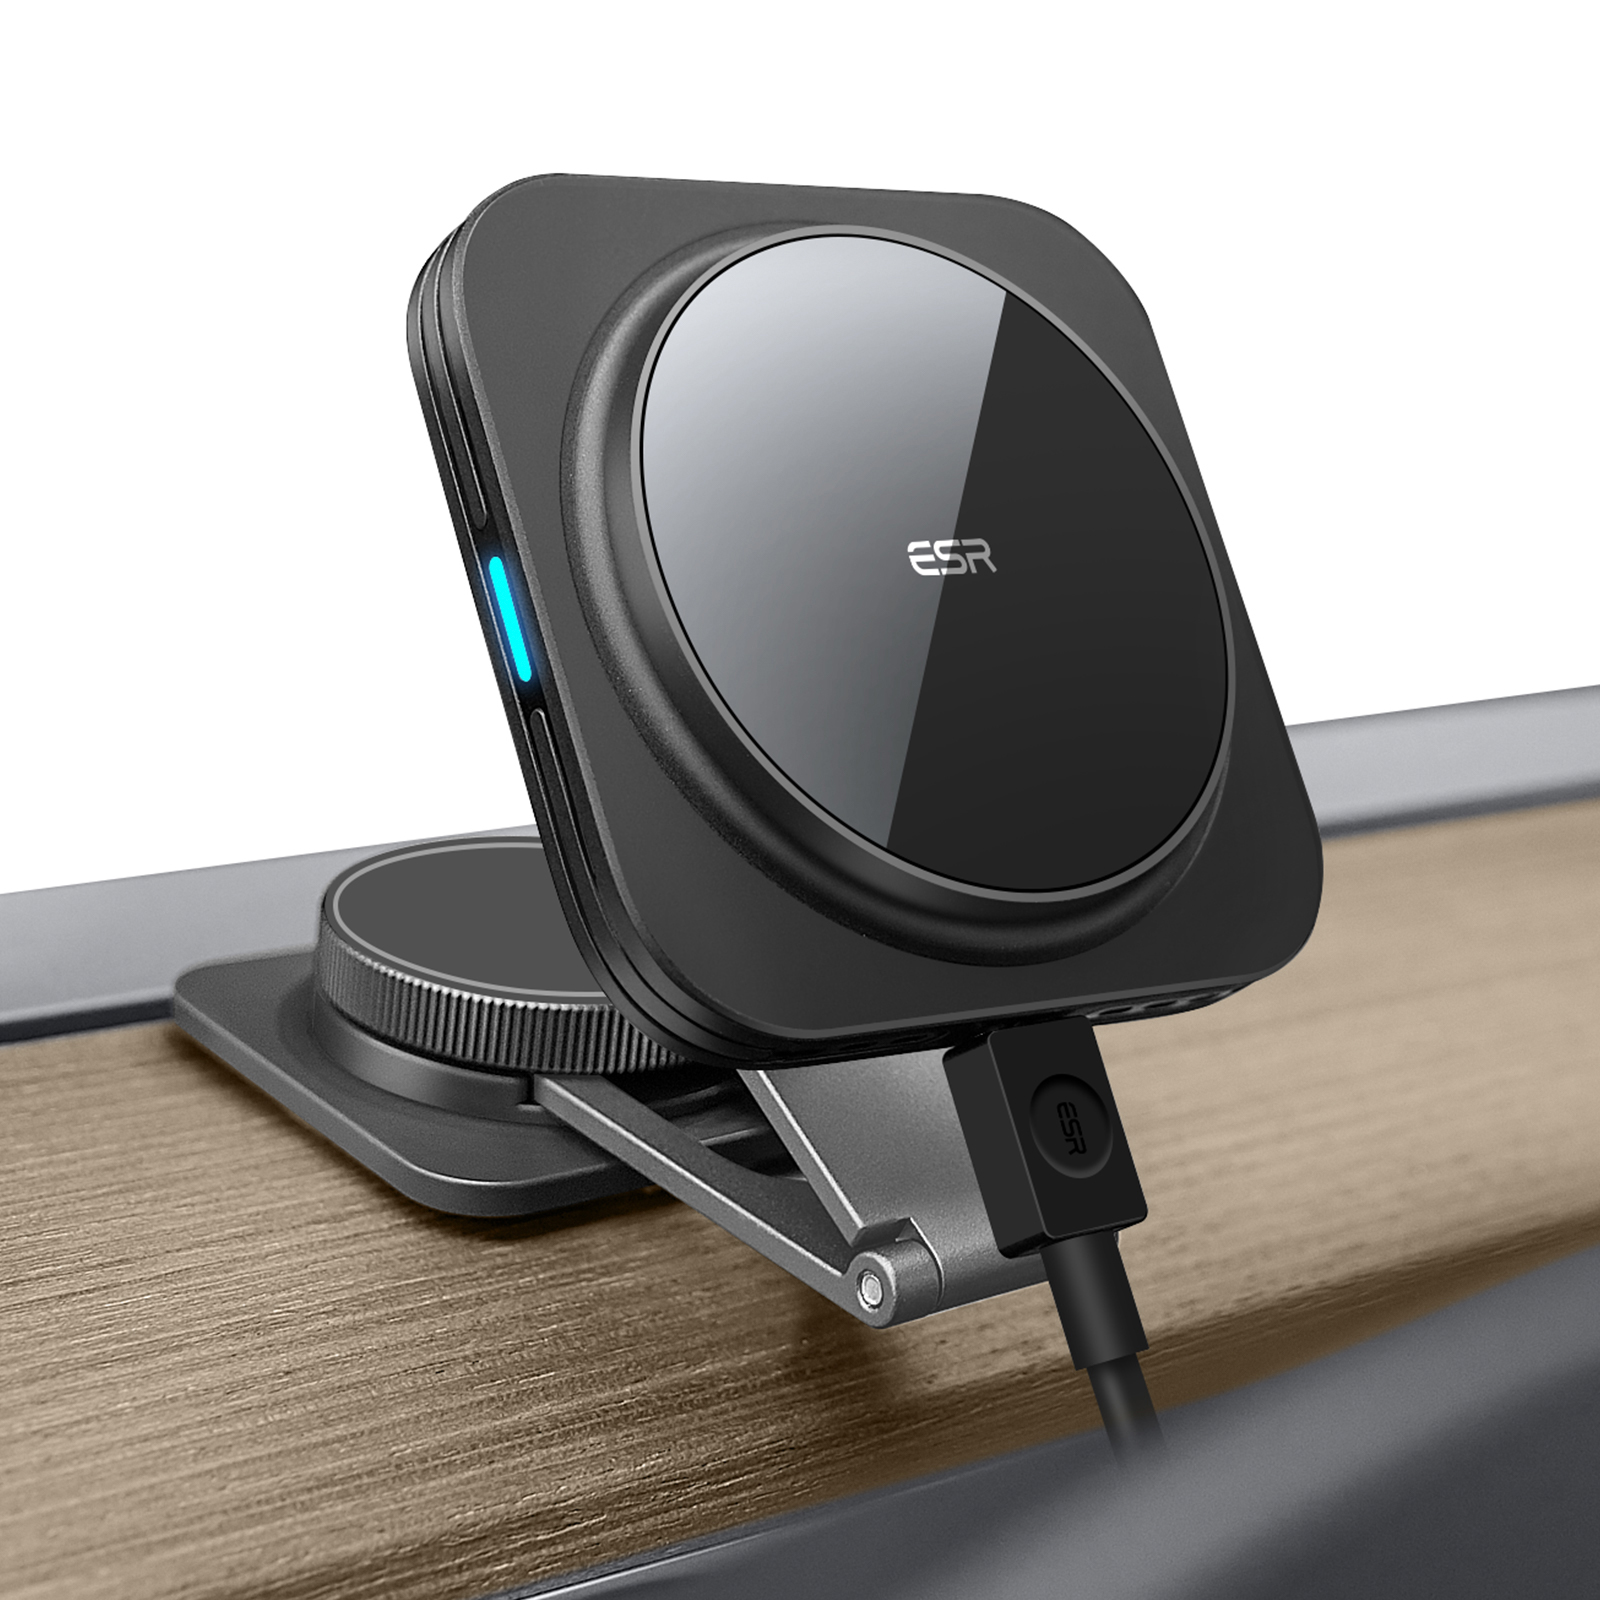 The BEST Magsafe Wireless Car Charger - ESR 15W MagSafe Car Charger with  CryoBoost 